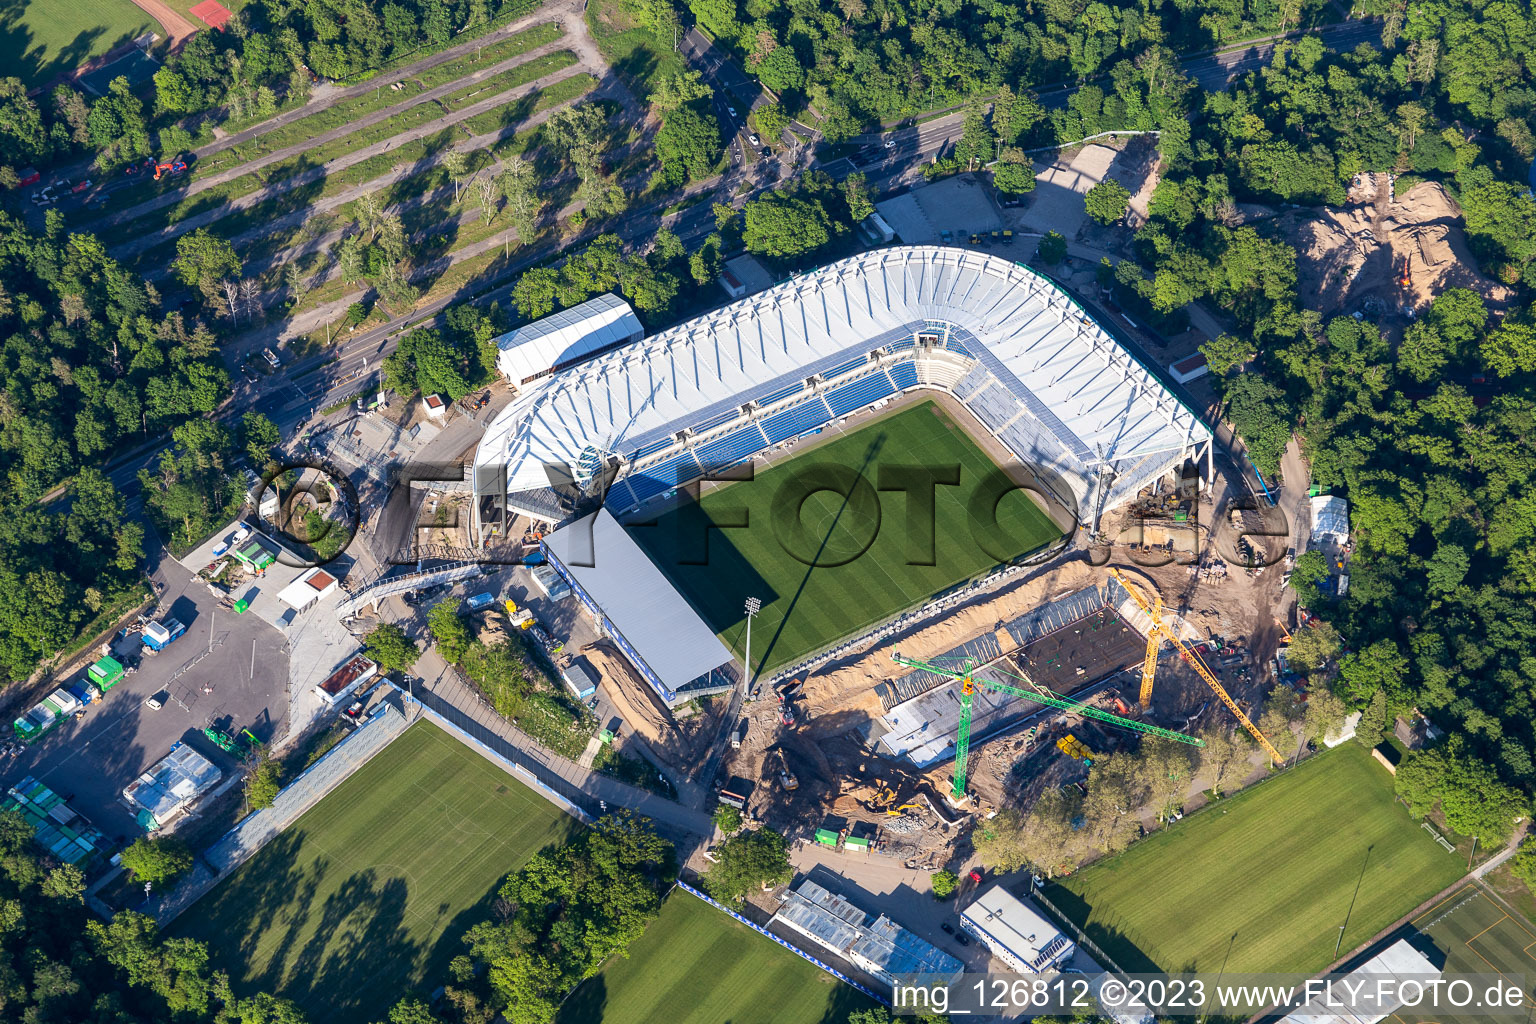 Extension and conversion site on the sports ground of the stadium " Wildparkstadion " in Karlsruhe in the state Baden-Wurttemberg, Germany from the drone perspective